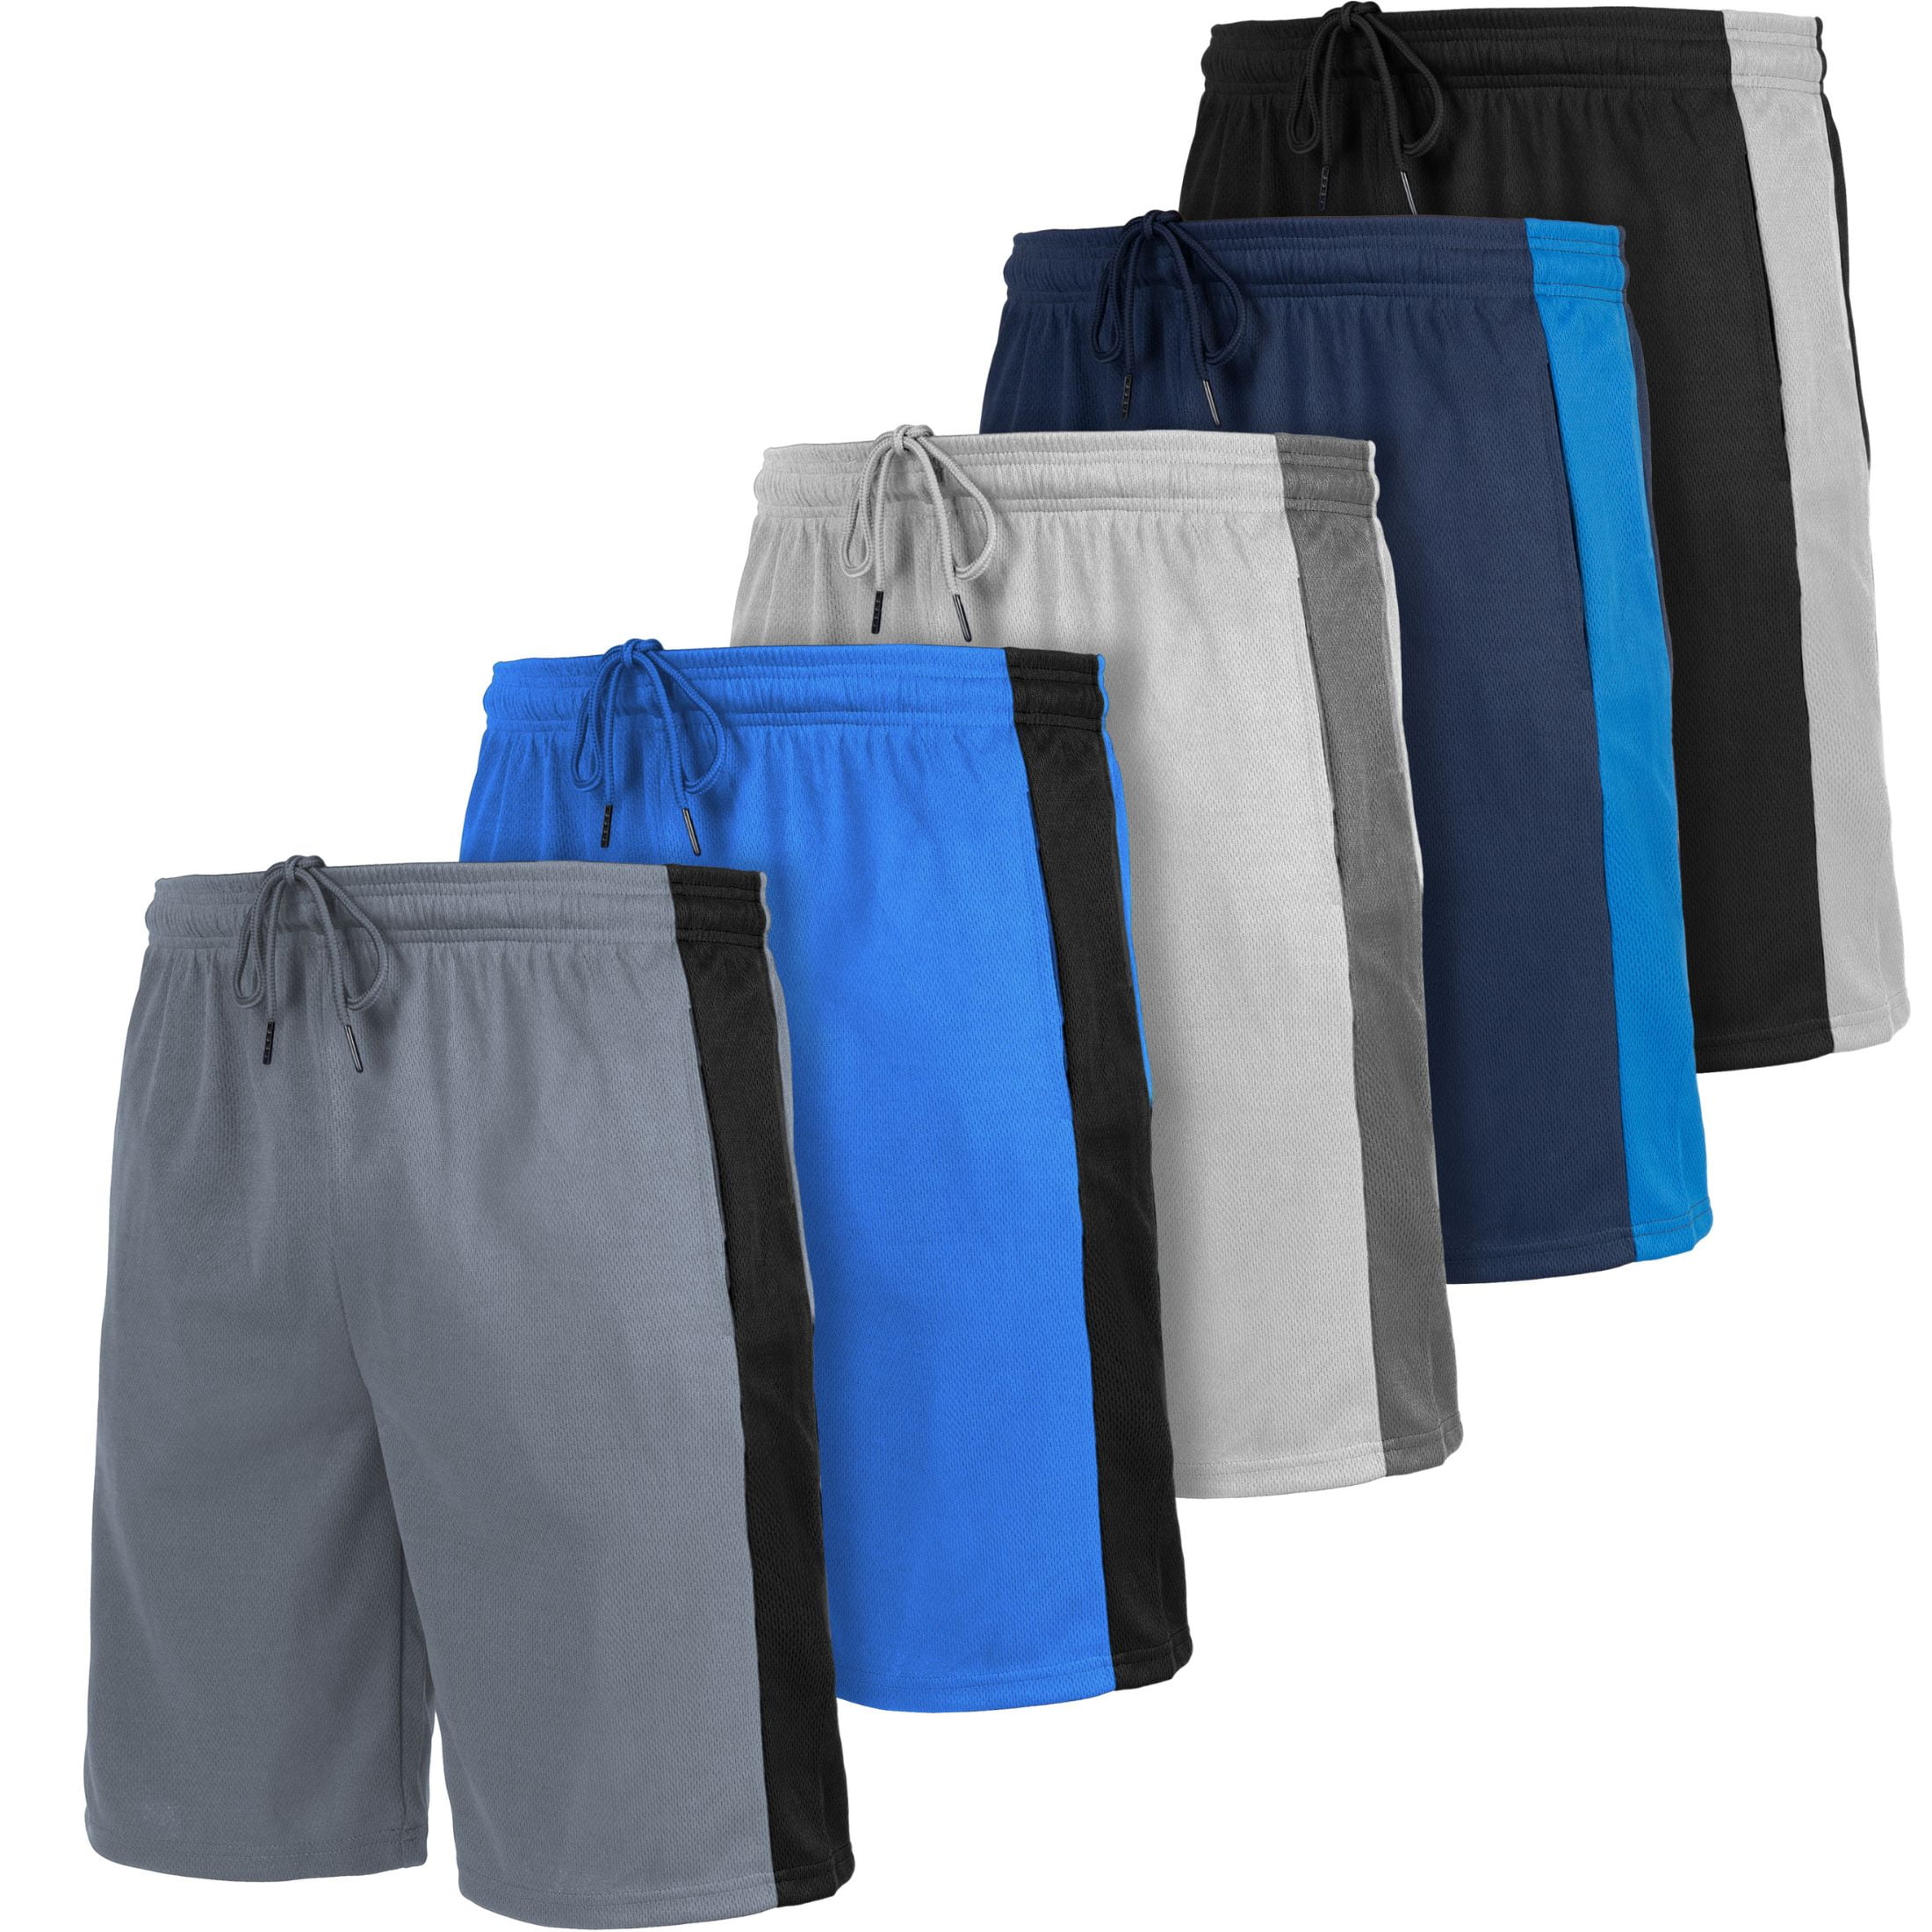 [5 Pack] Men’s Dry-Fit Active Athletic Performance Shorts - Basketball ...